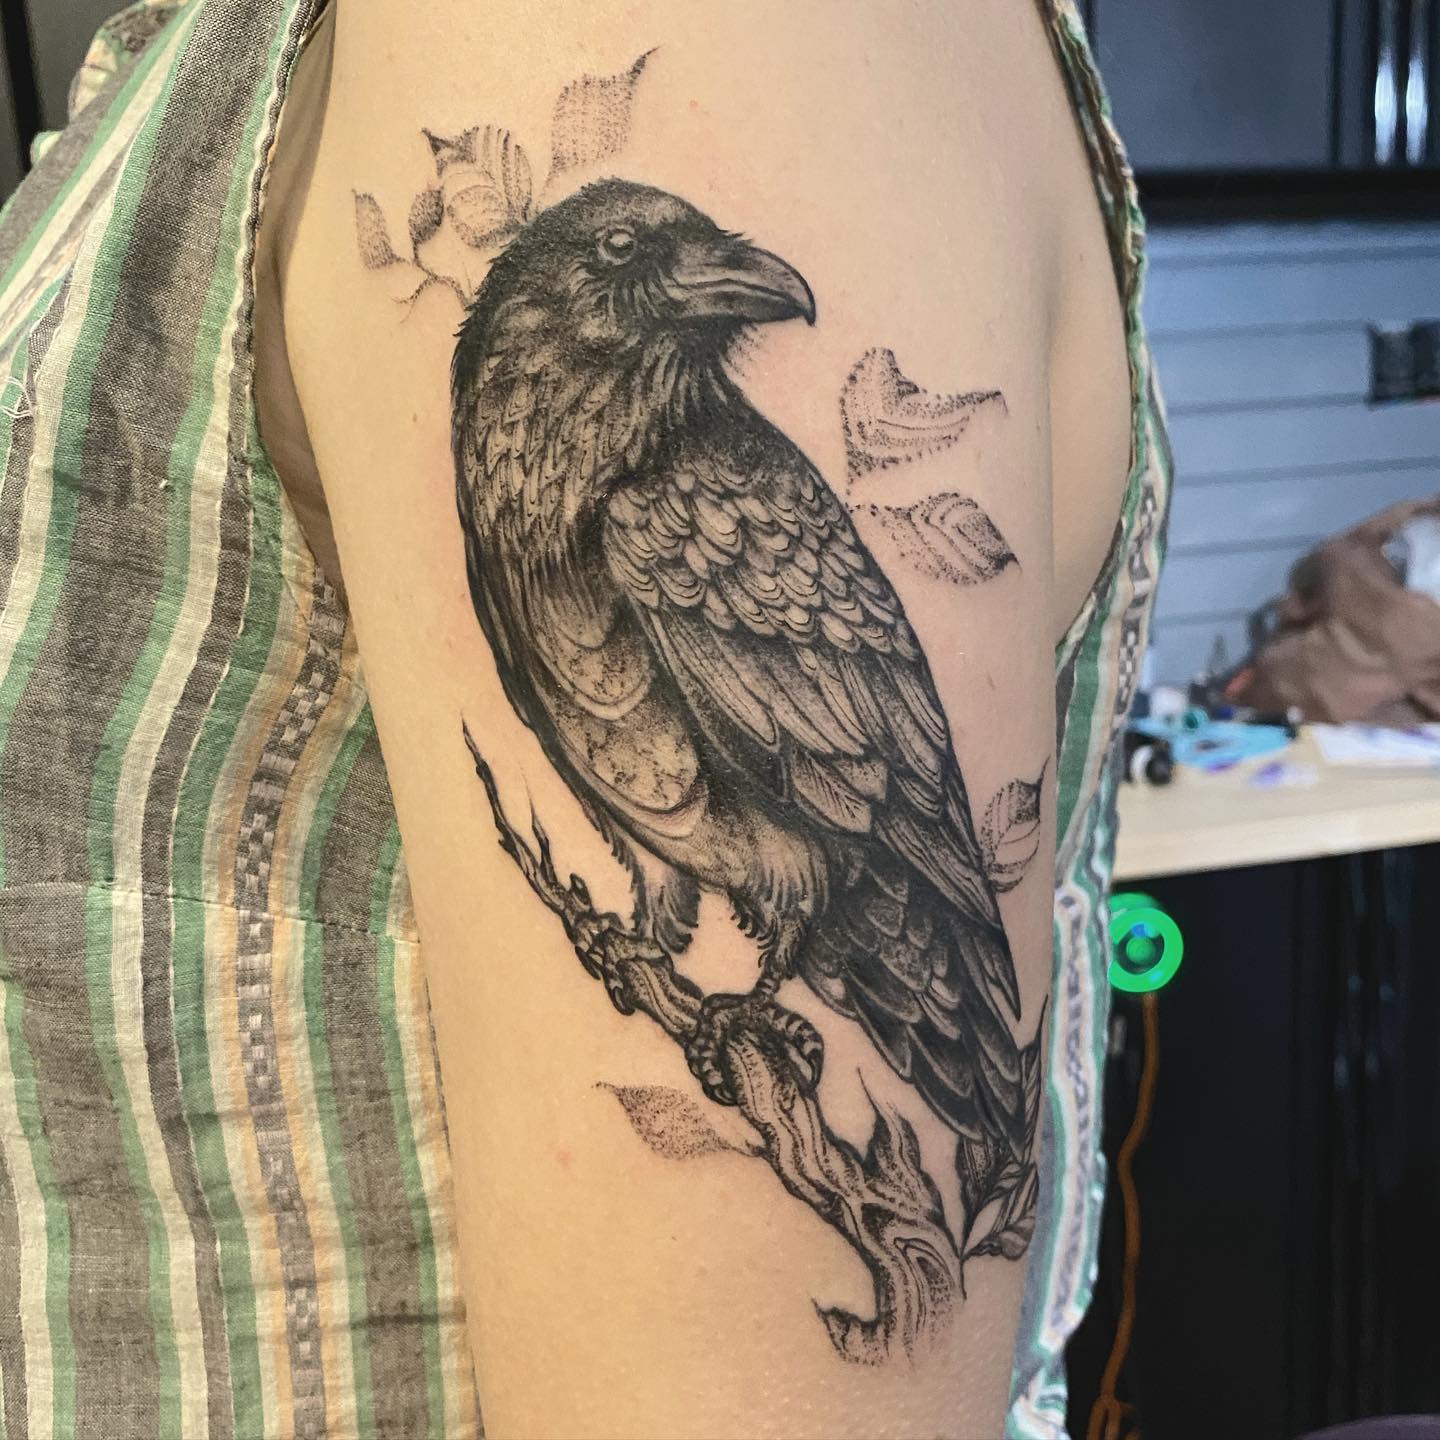 A raven symbolizes prophecy and insight. Then, what are you waiting for? Go and get this amazing dotwork tattoo.